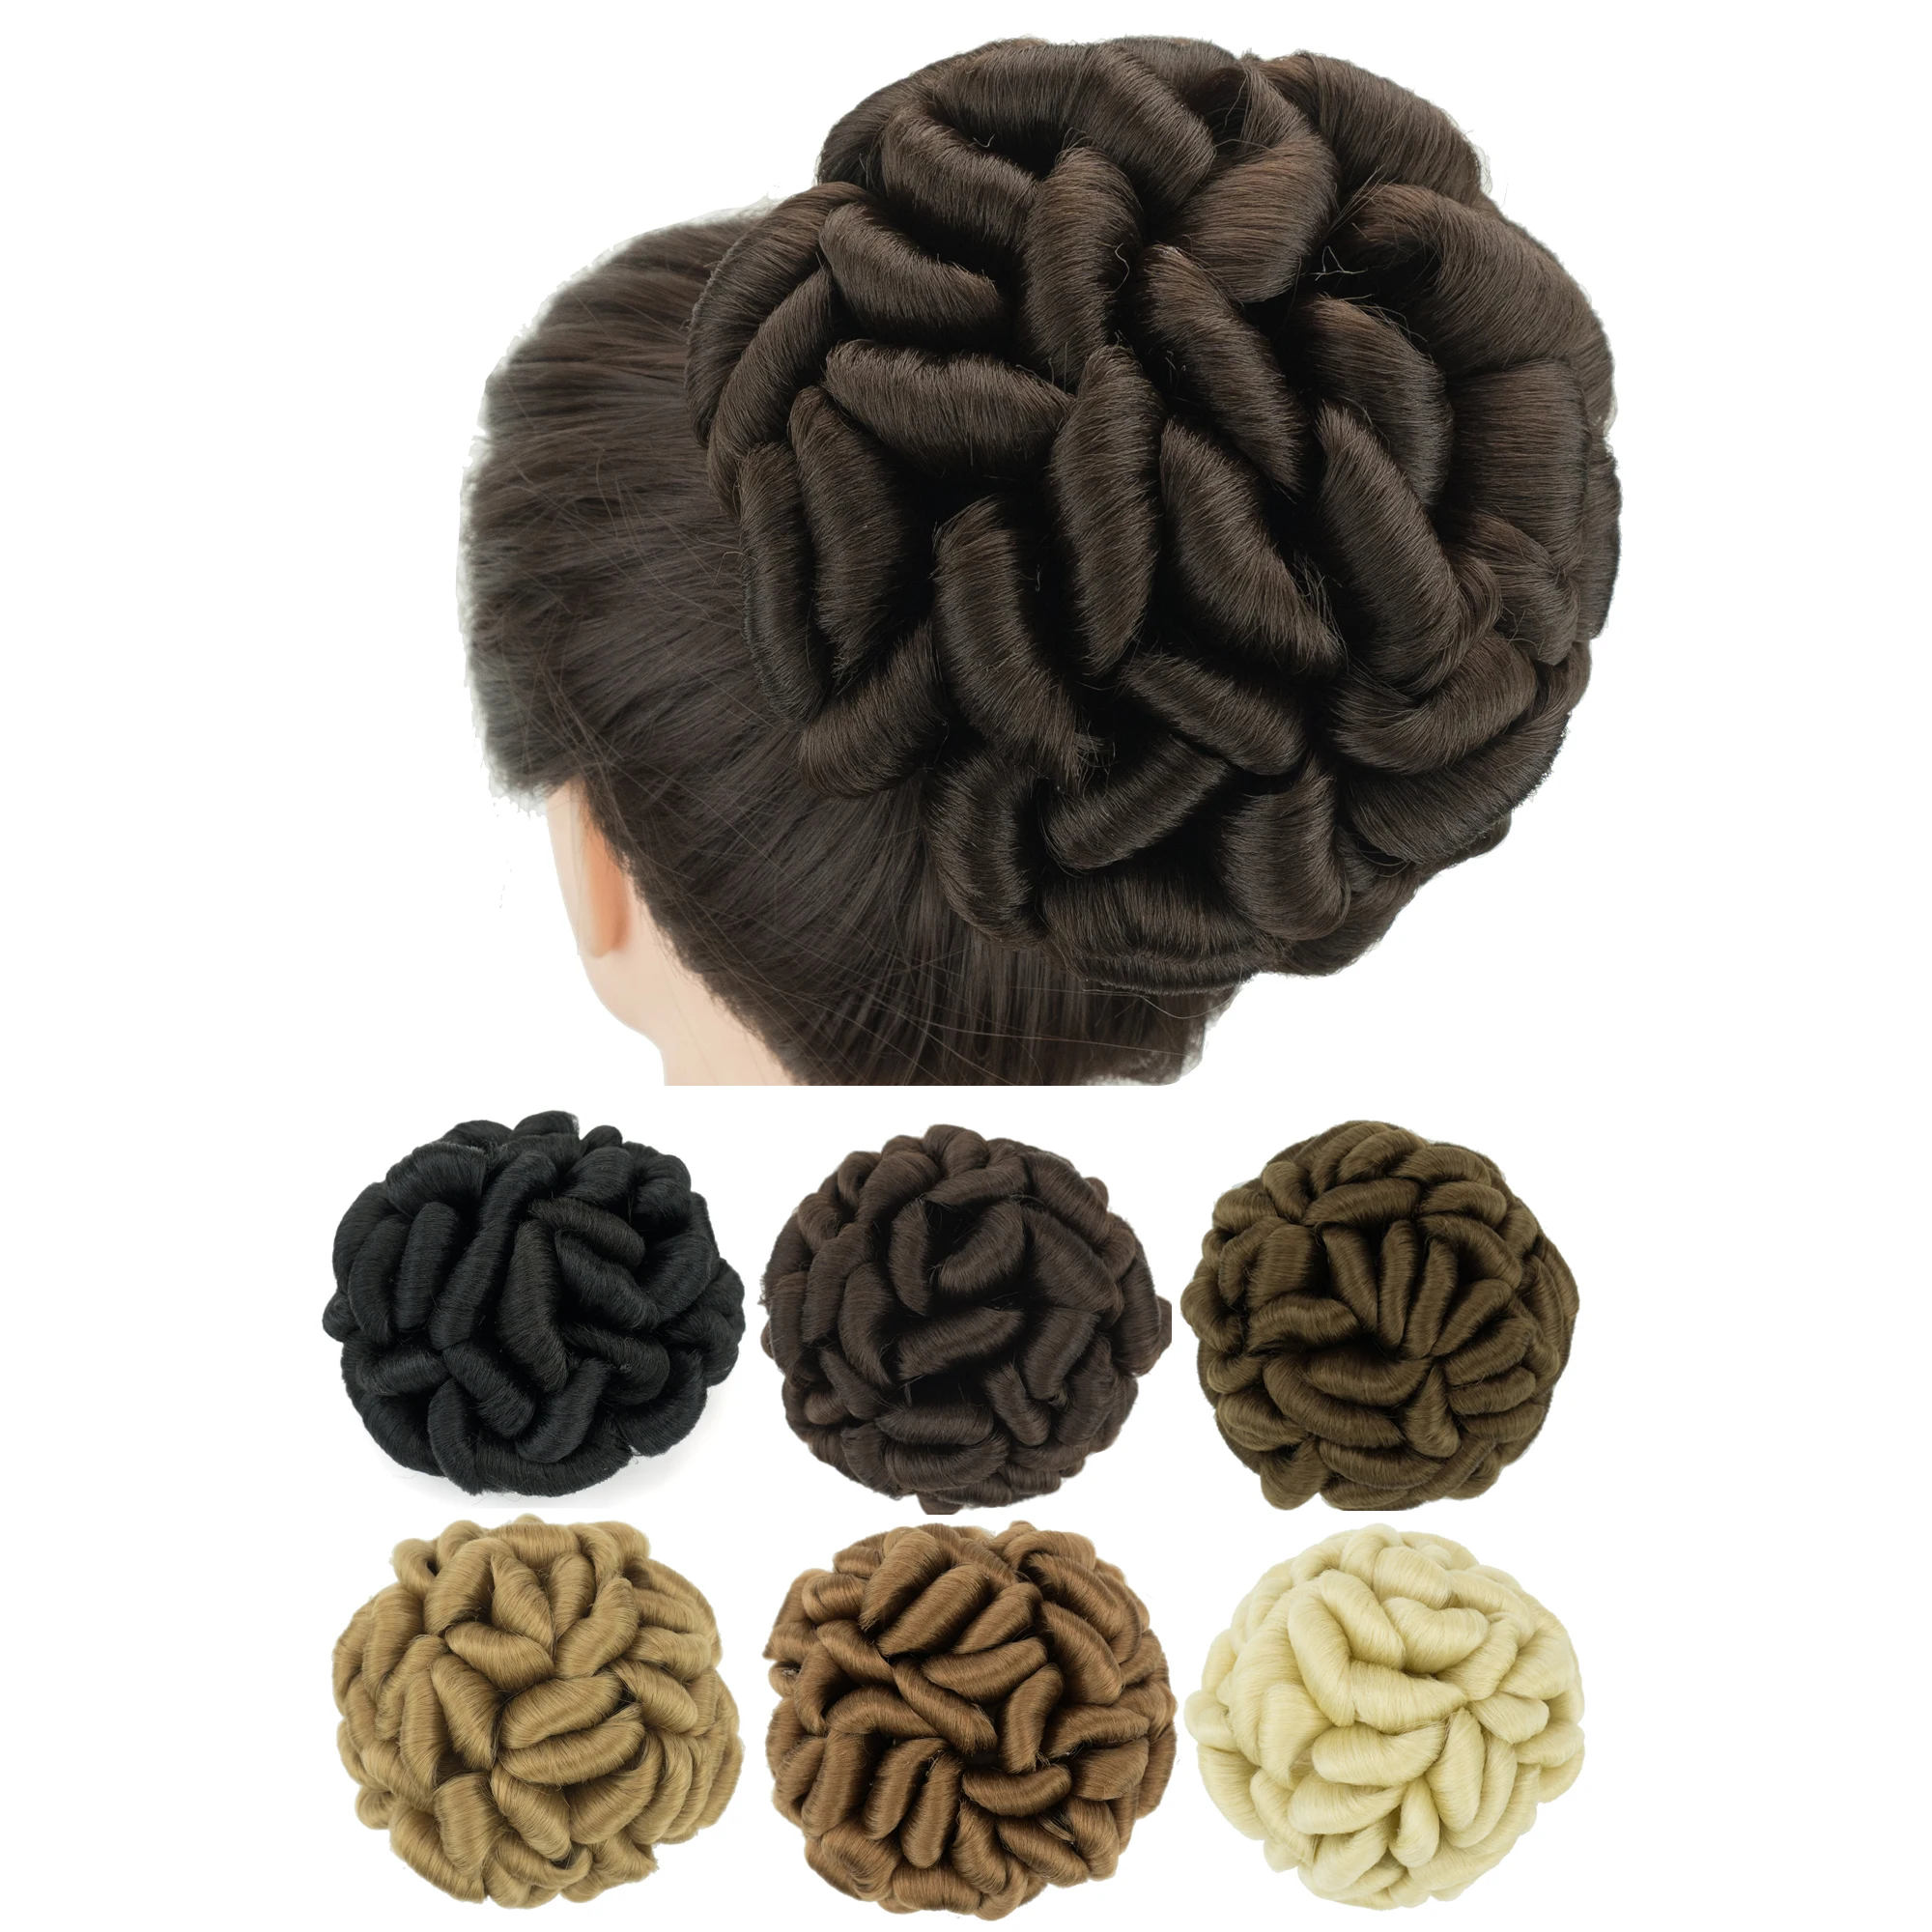 Soowee Large Size Braided Messy Curly Hairstyle Scrunchies Chignon Dancer Hair Cover Donut Hairpiece Hair Buns Updo for Women